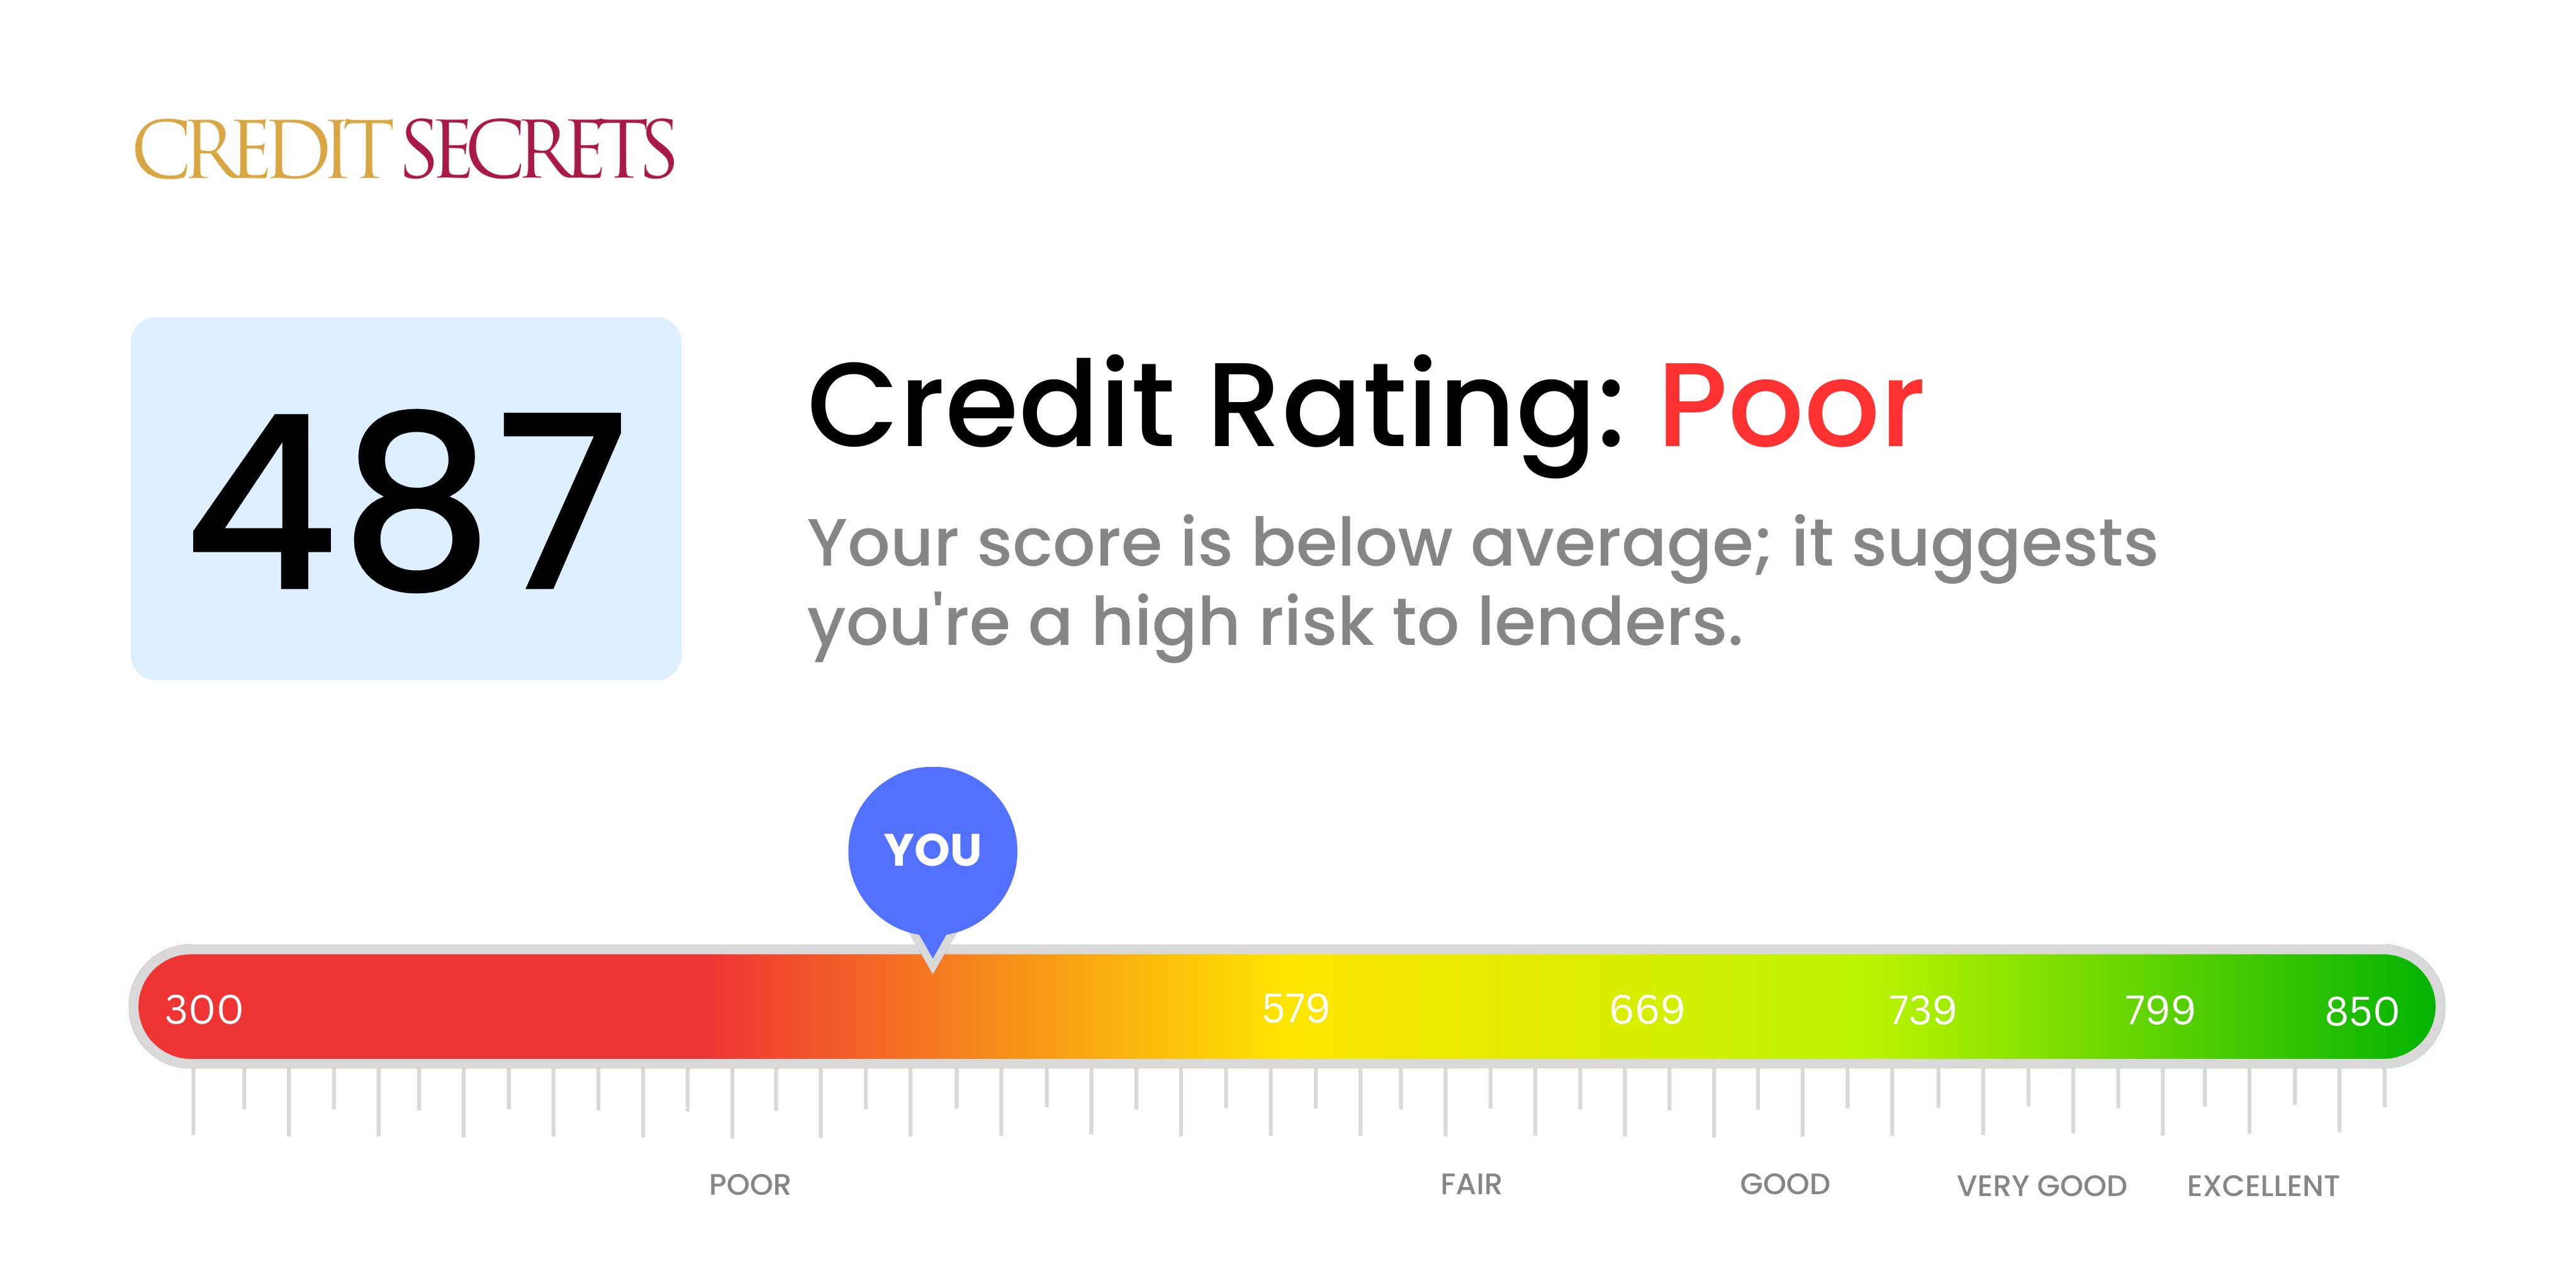 Is 487 a good credit score?